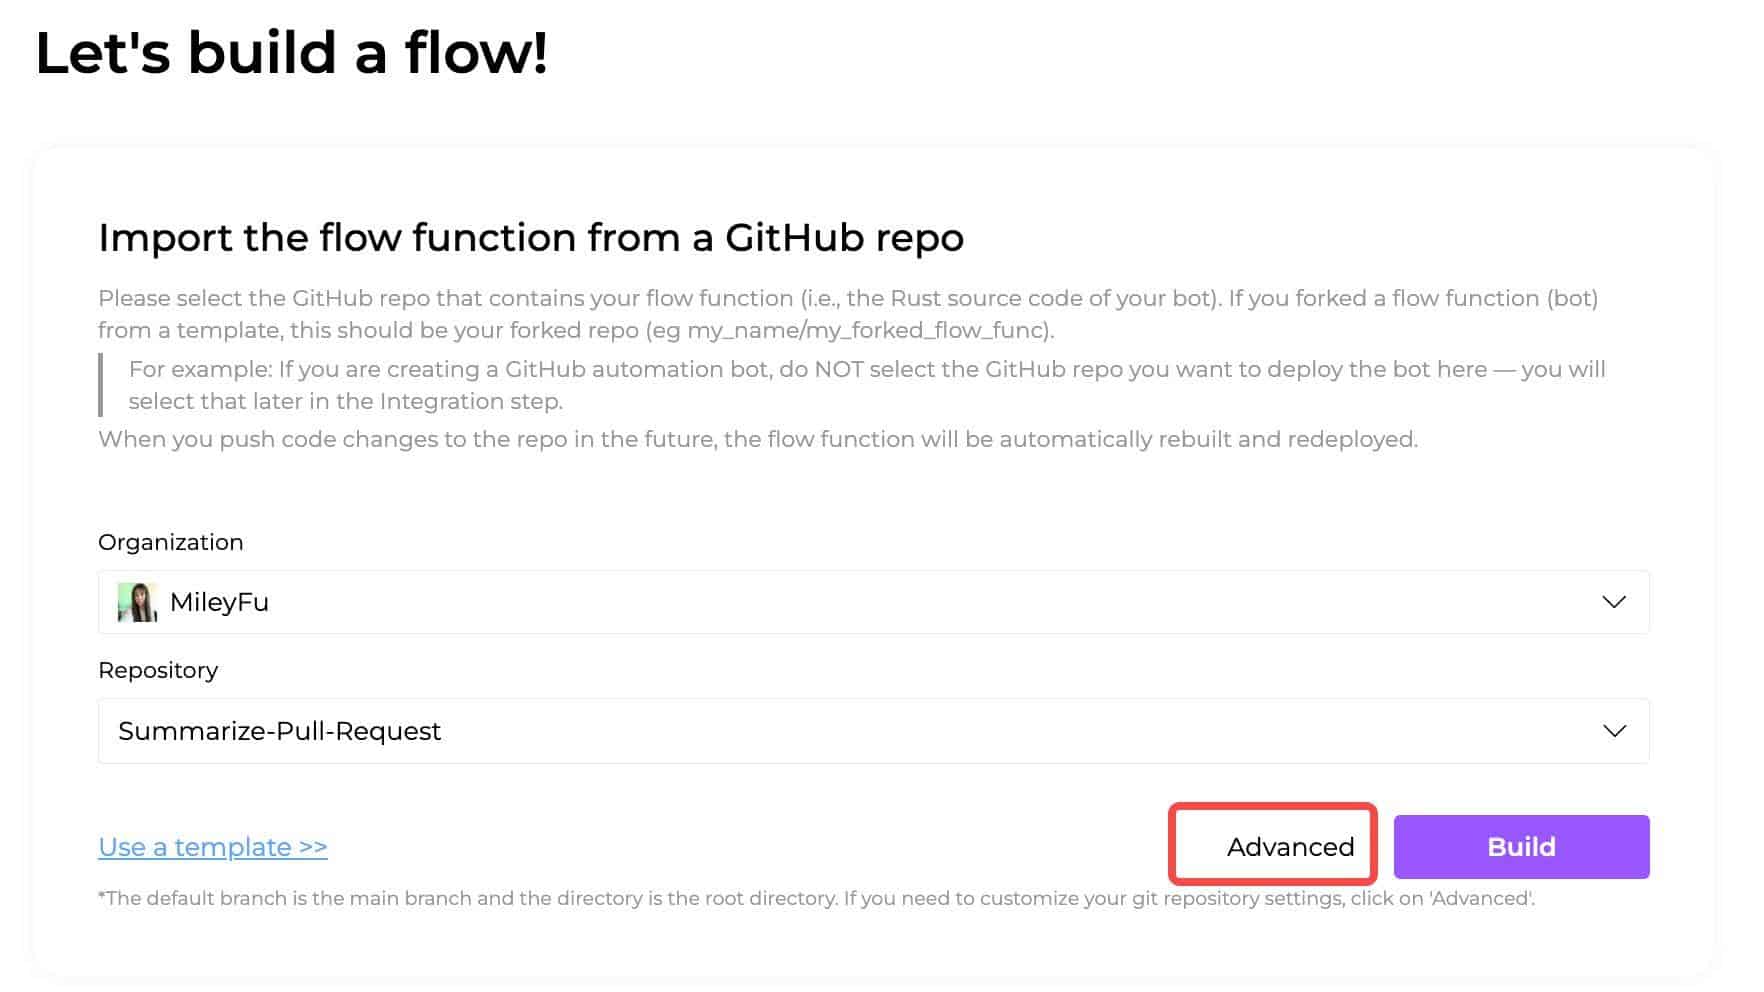 Screenshot showing Let's build a flow! page, highlighted on "Advanced"